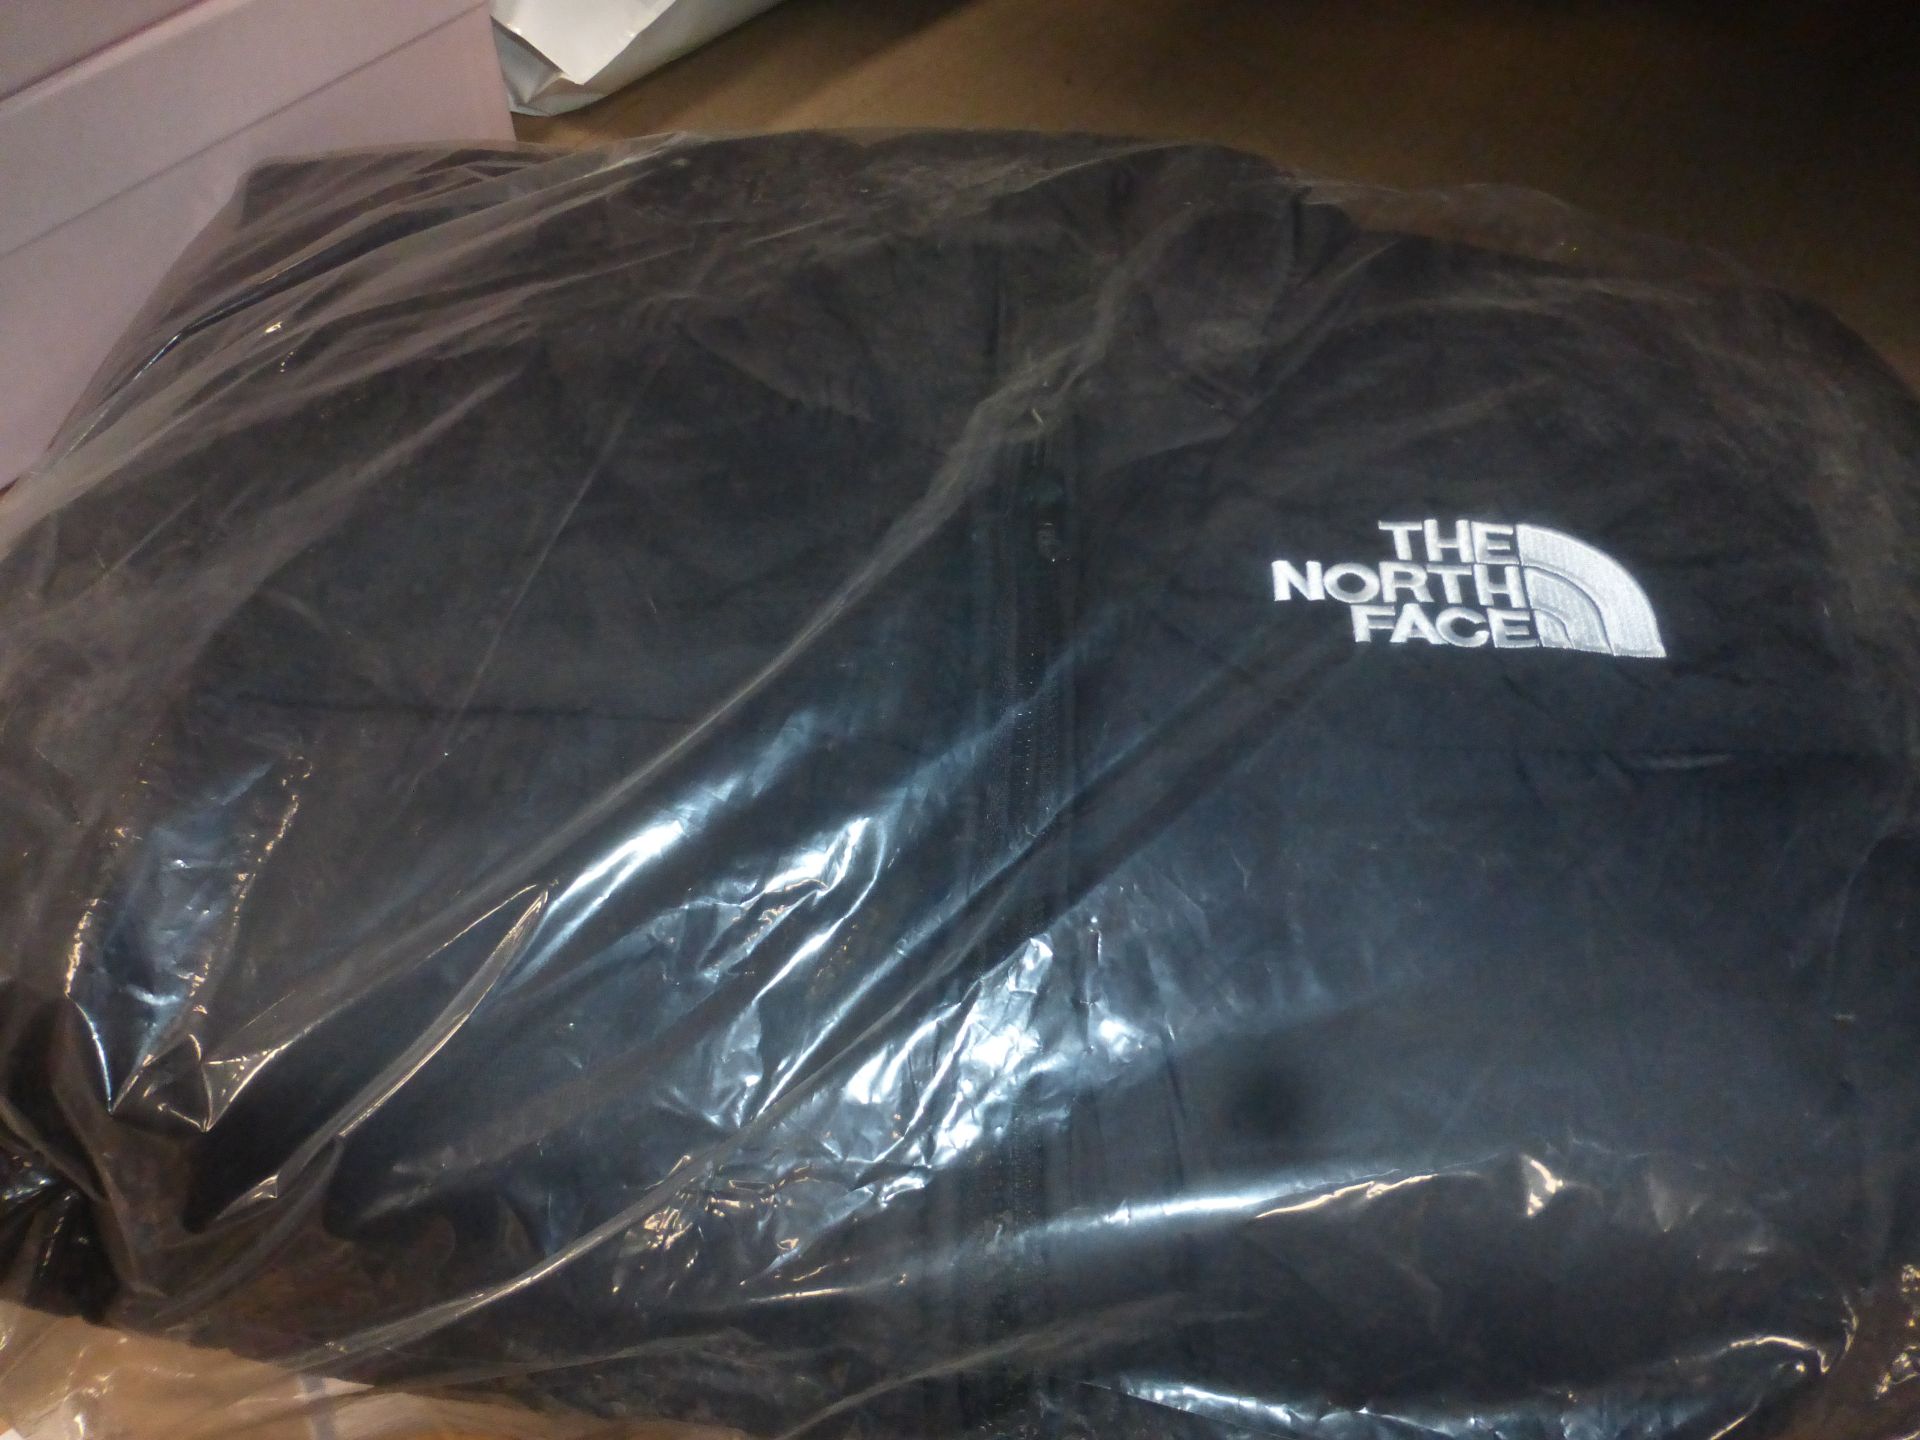 1 x The North Face Himalayan insulated vest, size M - new with tags (E7B) - Image 2 of 2